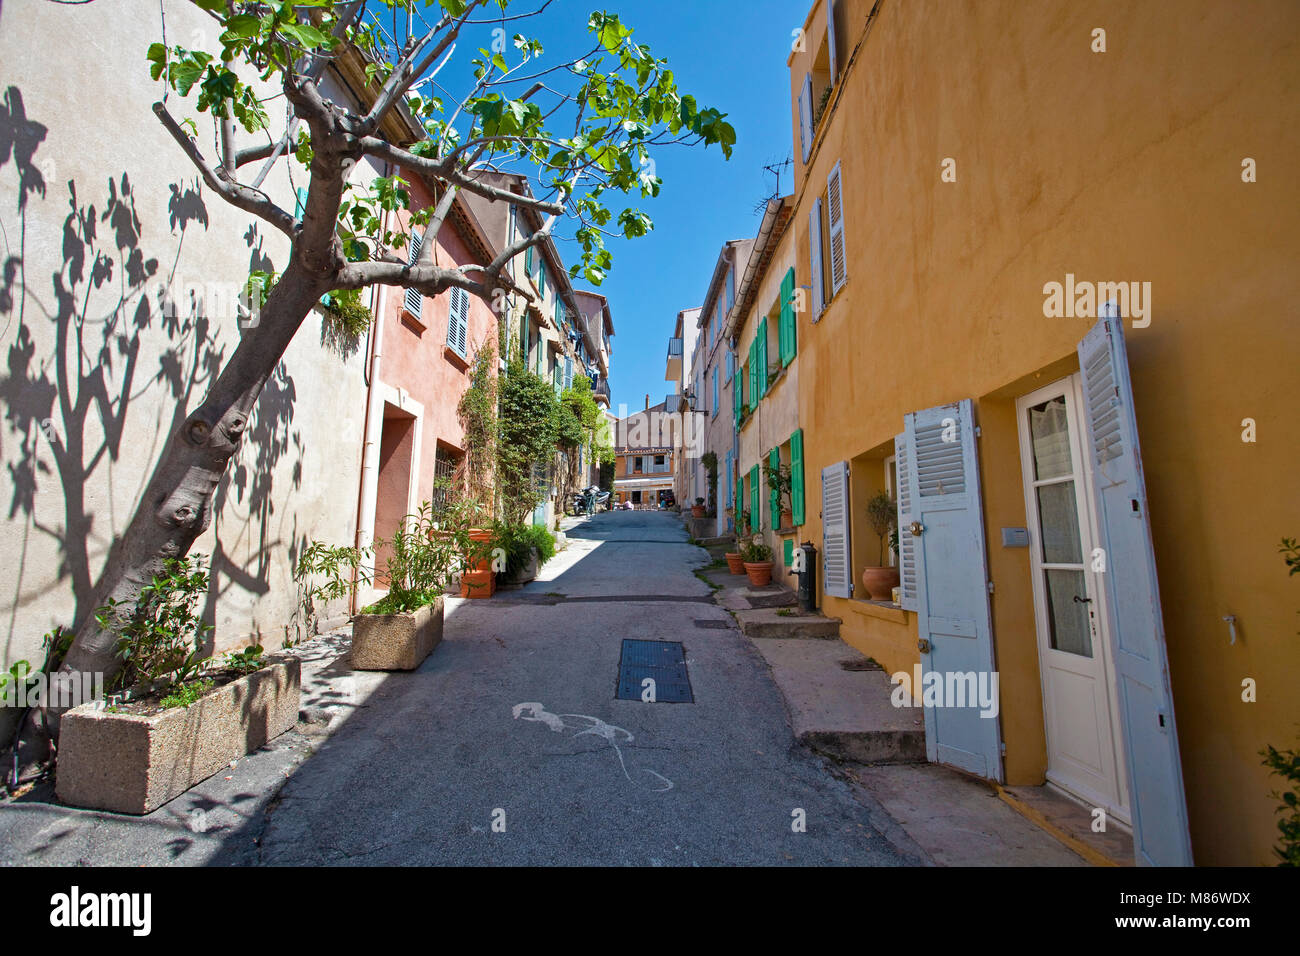 Alley at old town of Saint-Tropez, french riviera, South France, Cote d'Azur, France, Europe Stock Photo